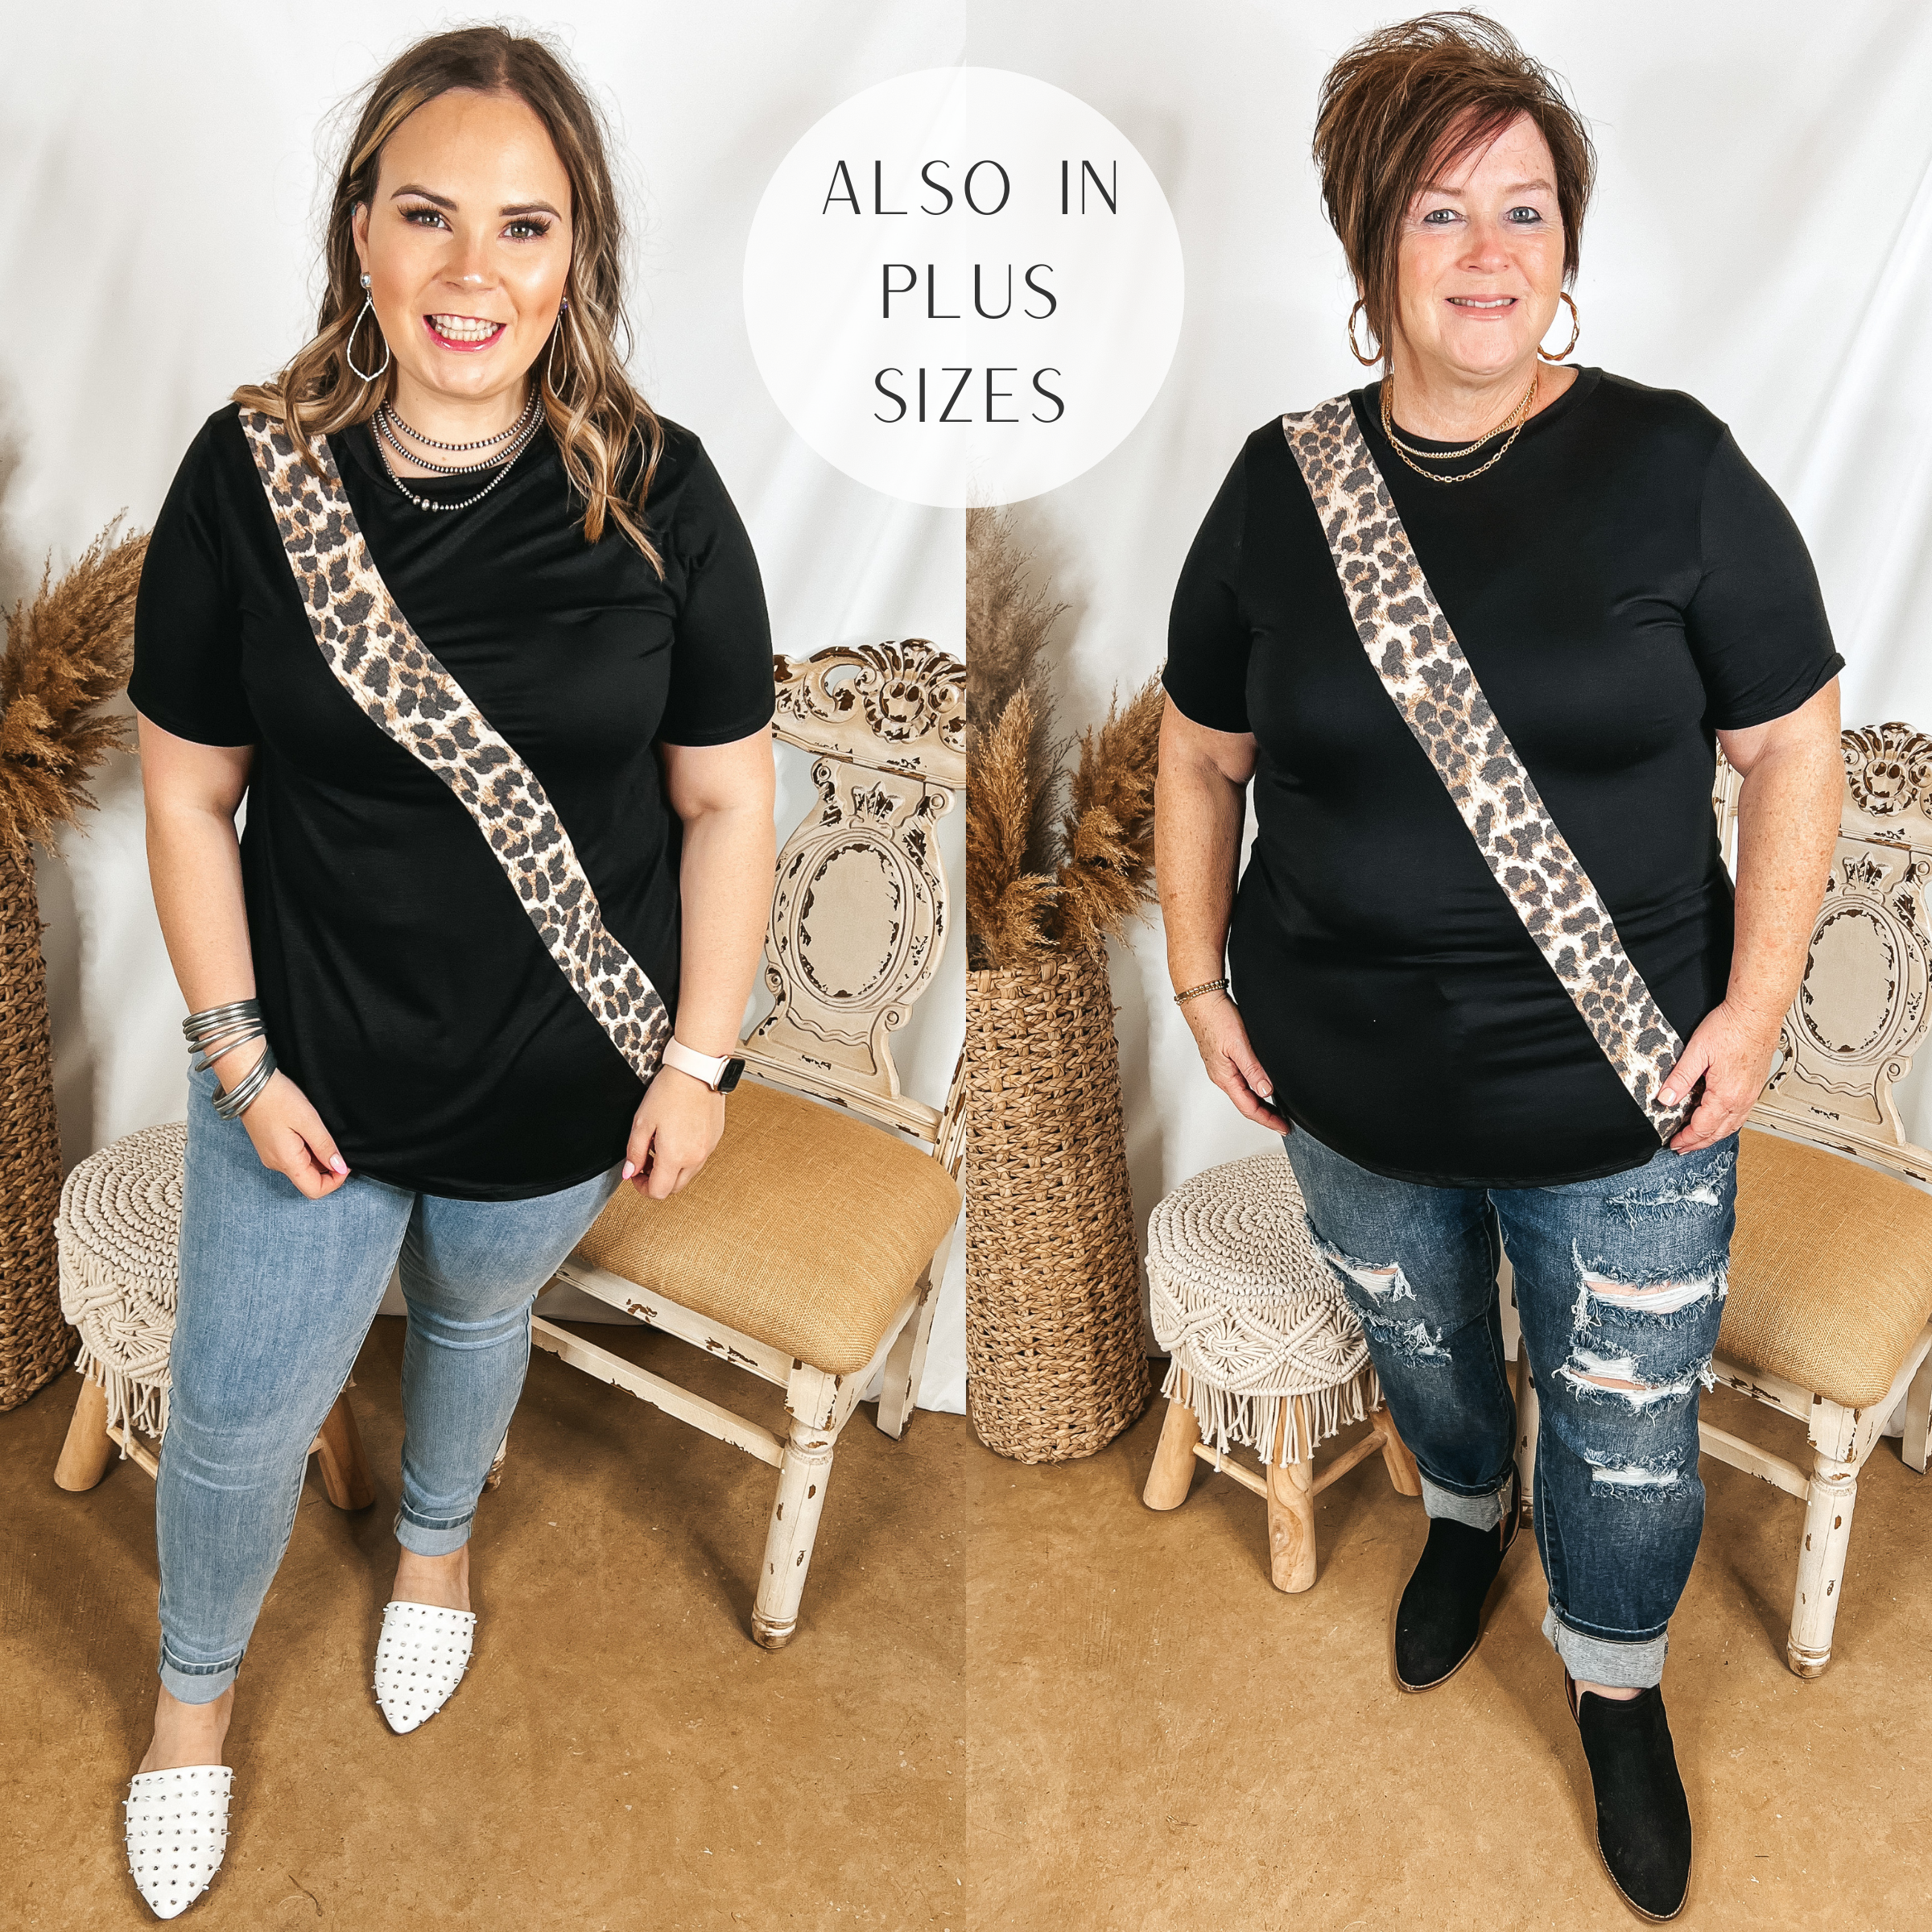 Models are wearing a black short sleeve top with a leopard print diagonal stripe. Size large model has it paired with light wash jeggings, white mules, and silver jewelry. Plus size model has it paired with dark wash distressed jeans, black booties, and gold jewelry.